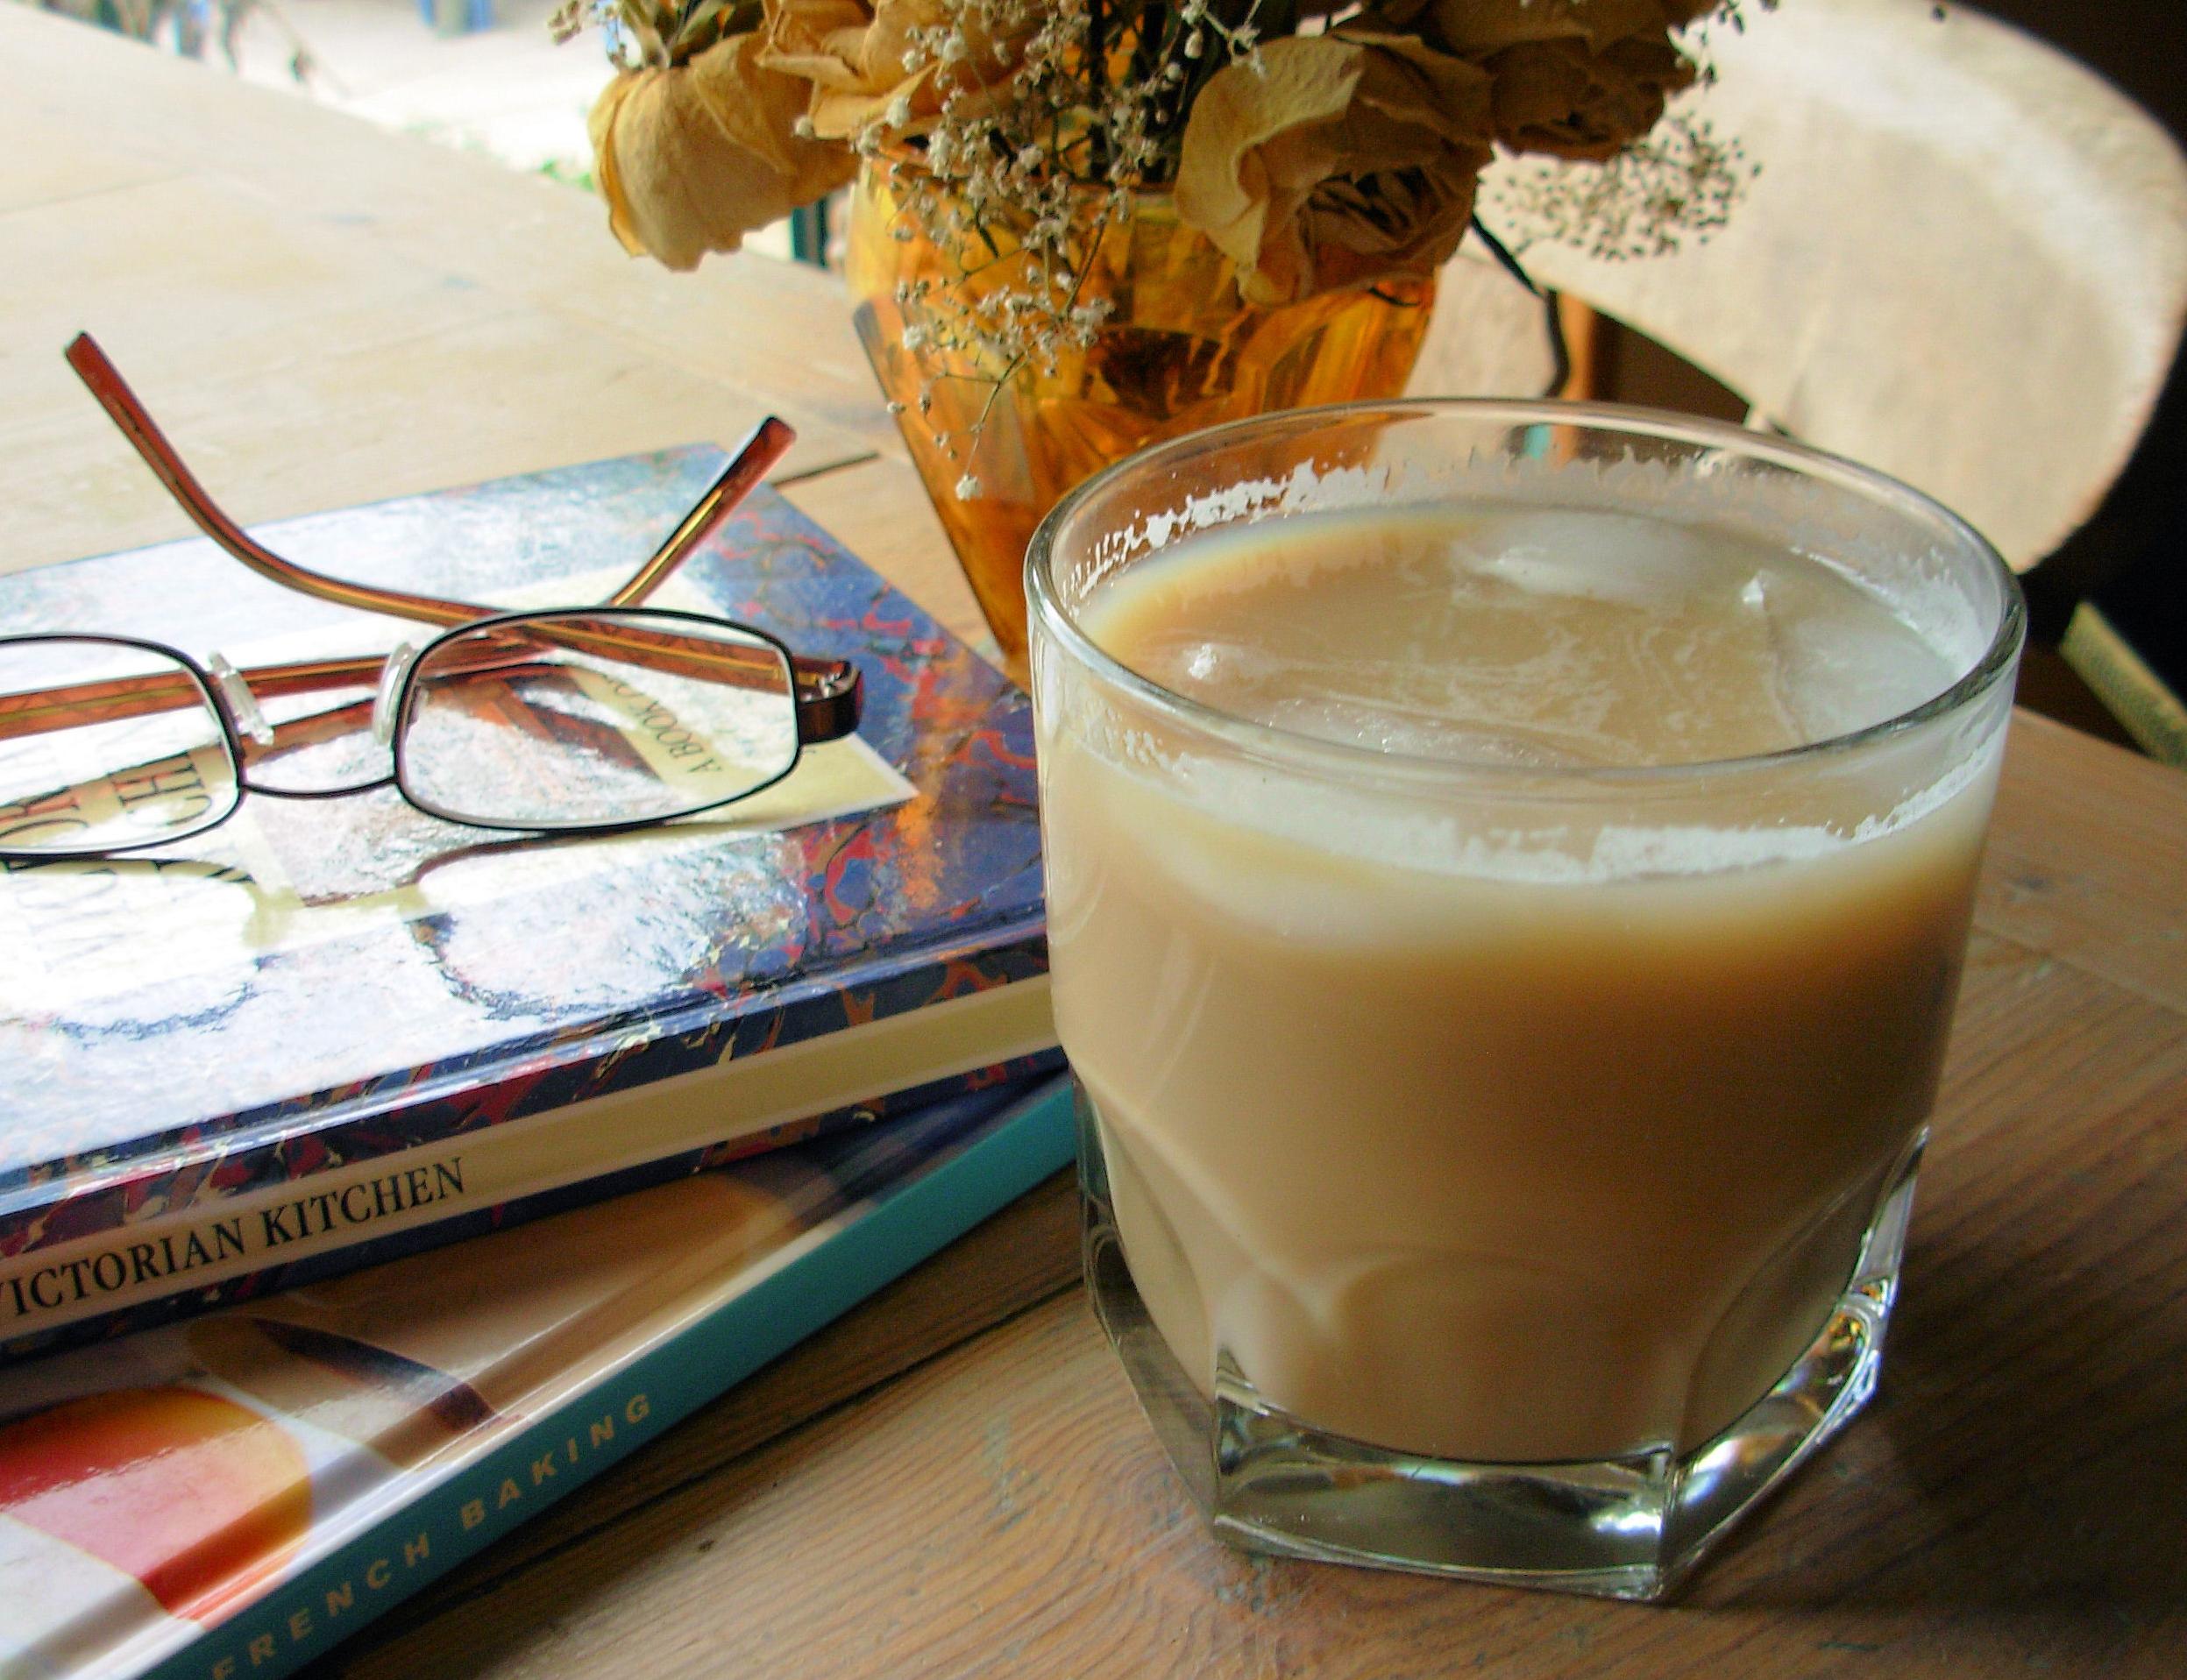  Cool down without the sugar rush with our No Sugar Added Iced Coffee recipe.